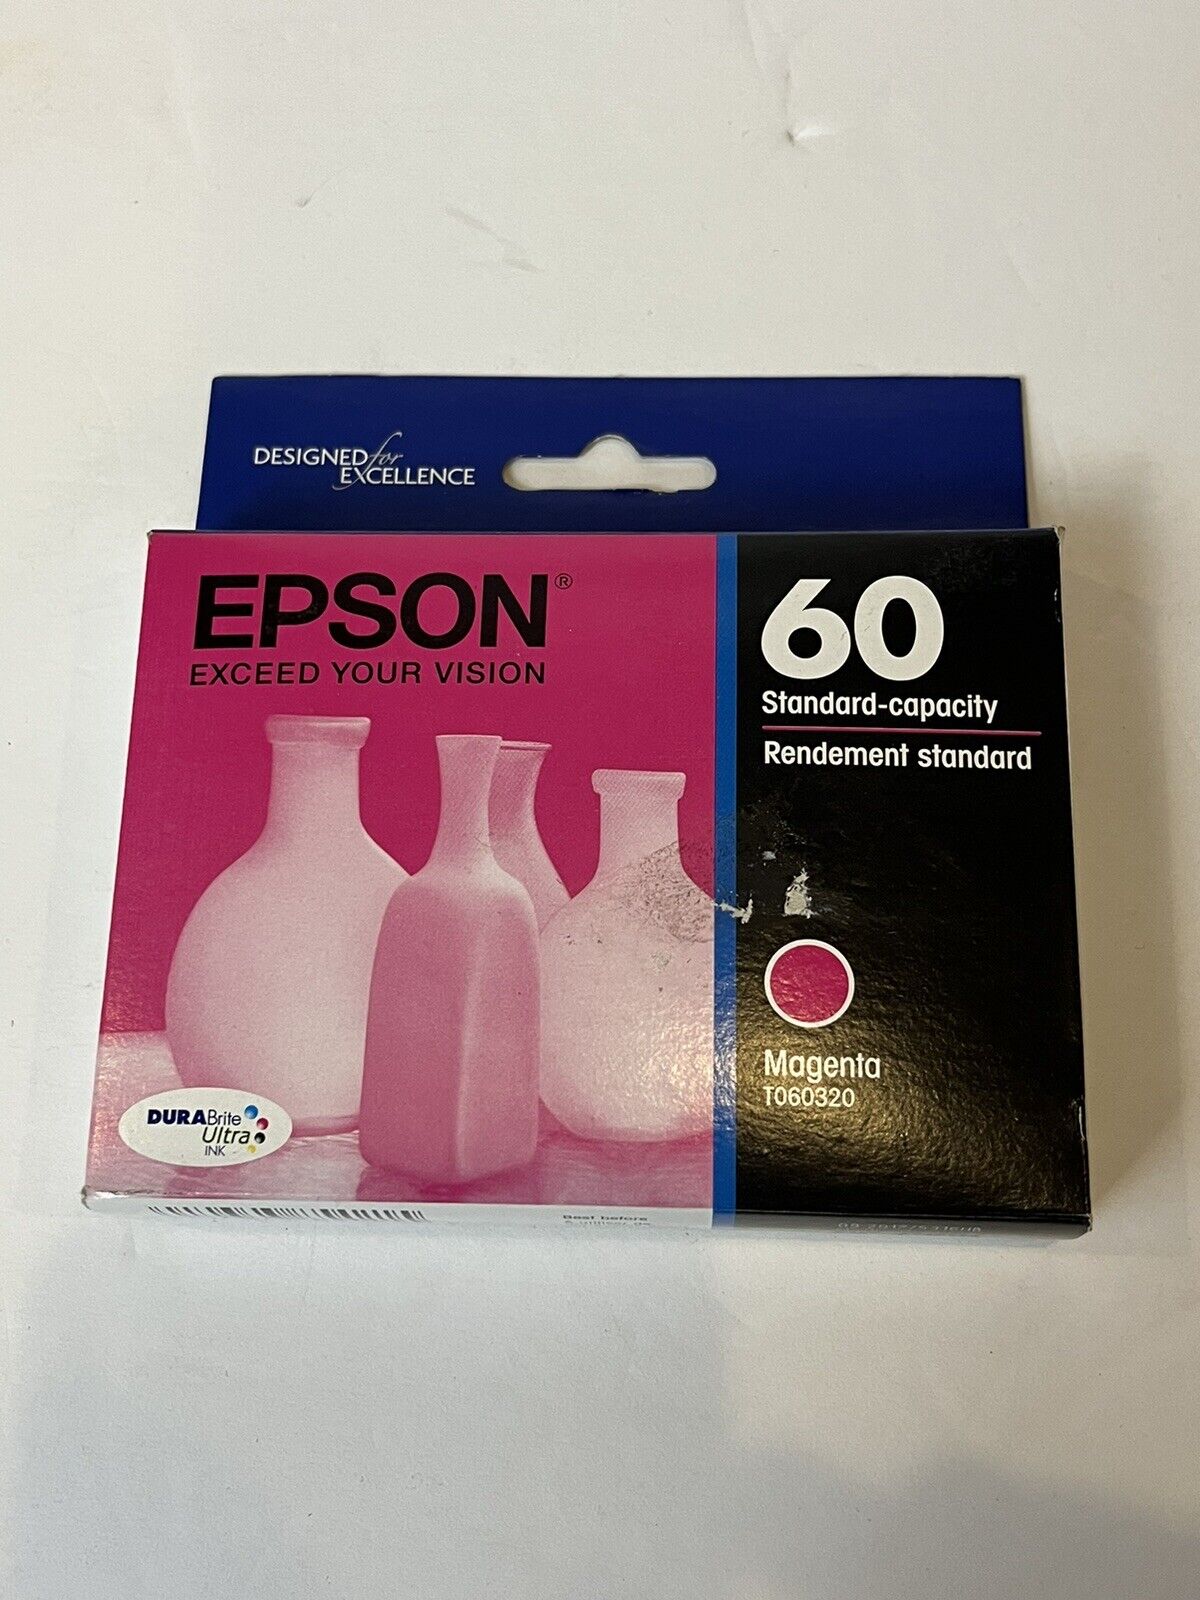 New (Expired) Epson 60 Standard Capacity Magenta Ink Cartridge for Stylus or CX